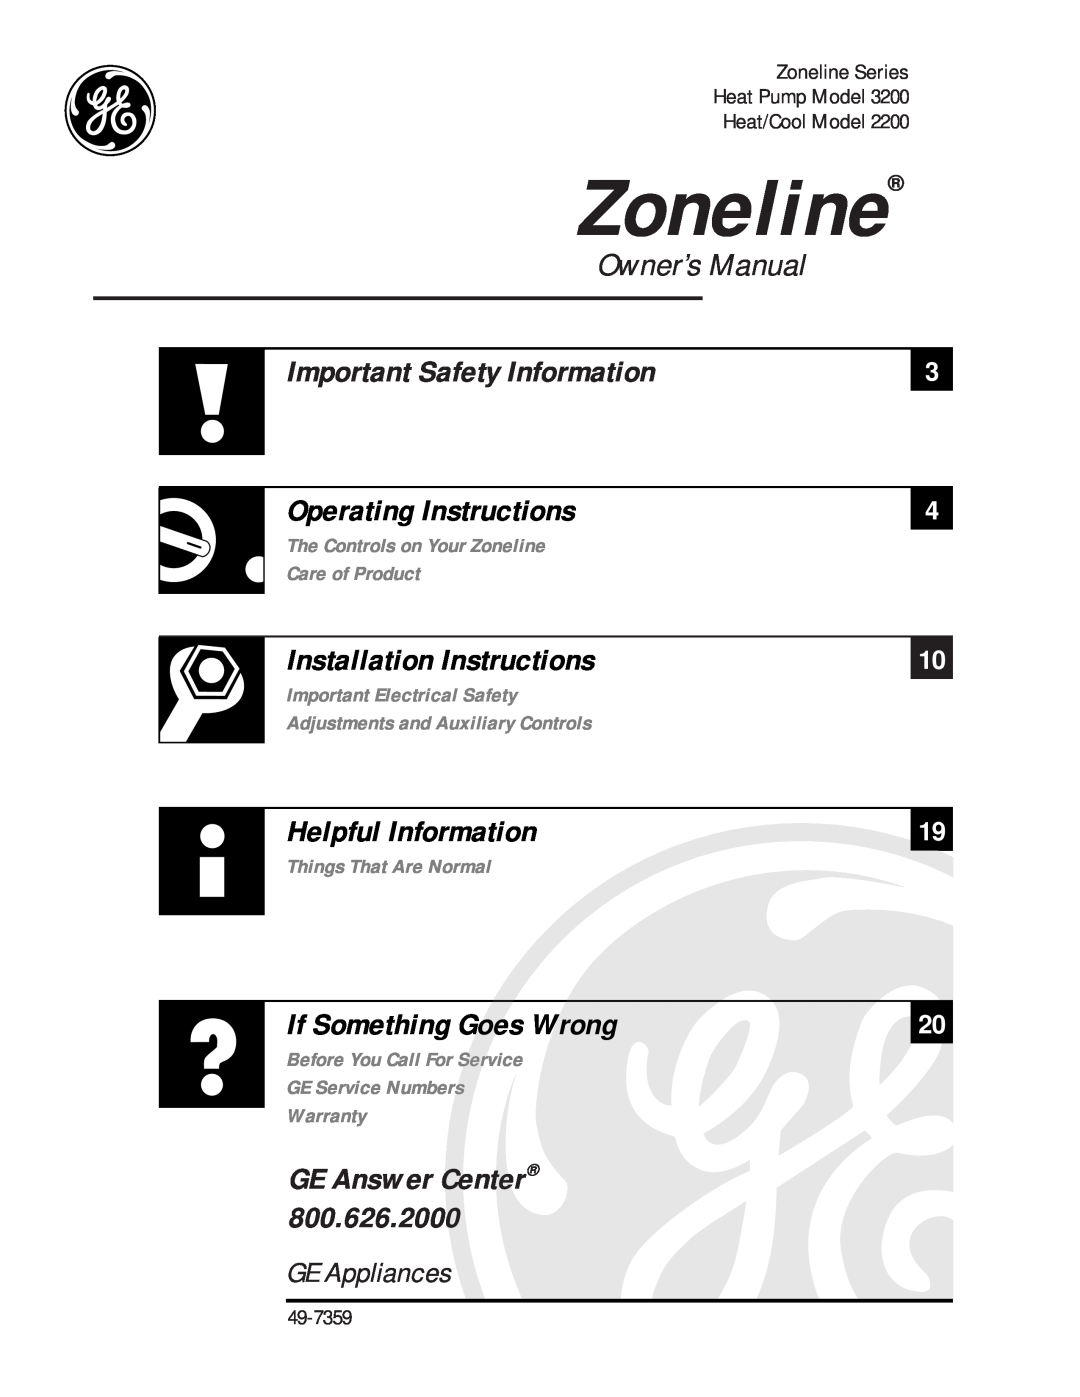 GE 3200 installation instructions GE Answer Center, Zoneline, Important Safety Information, Operating Instructions 